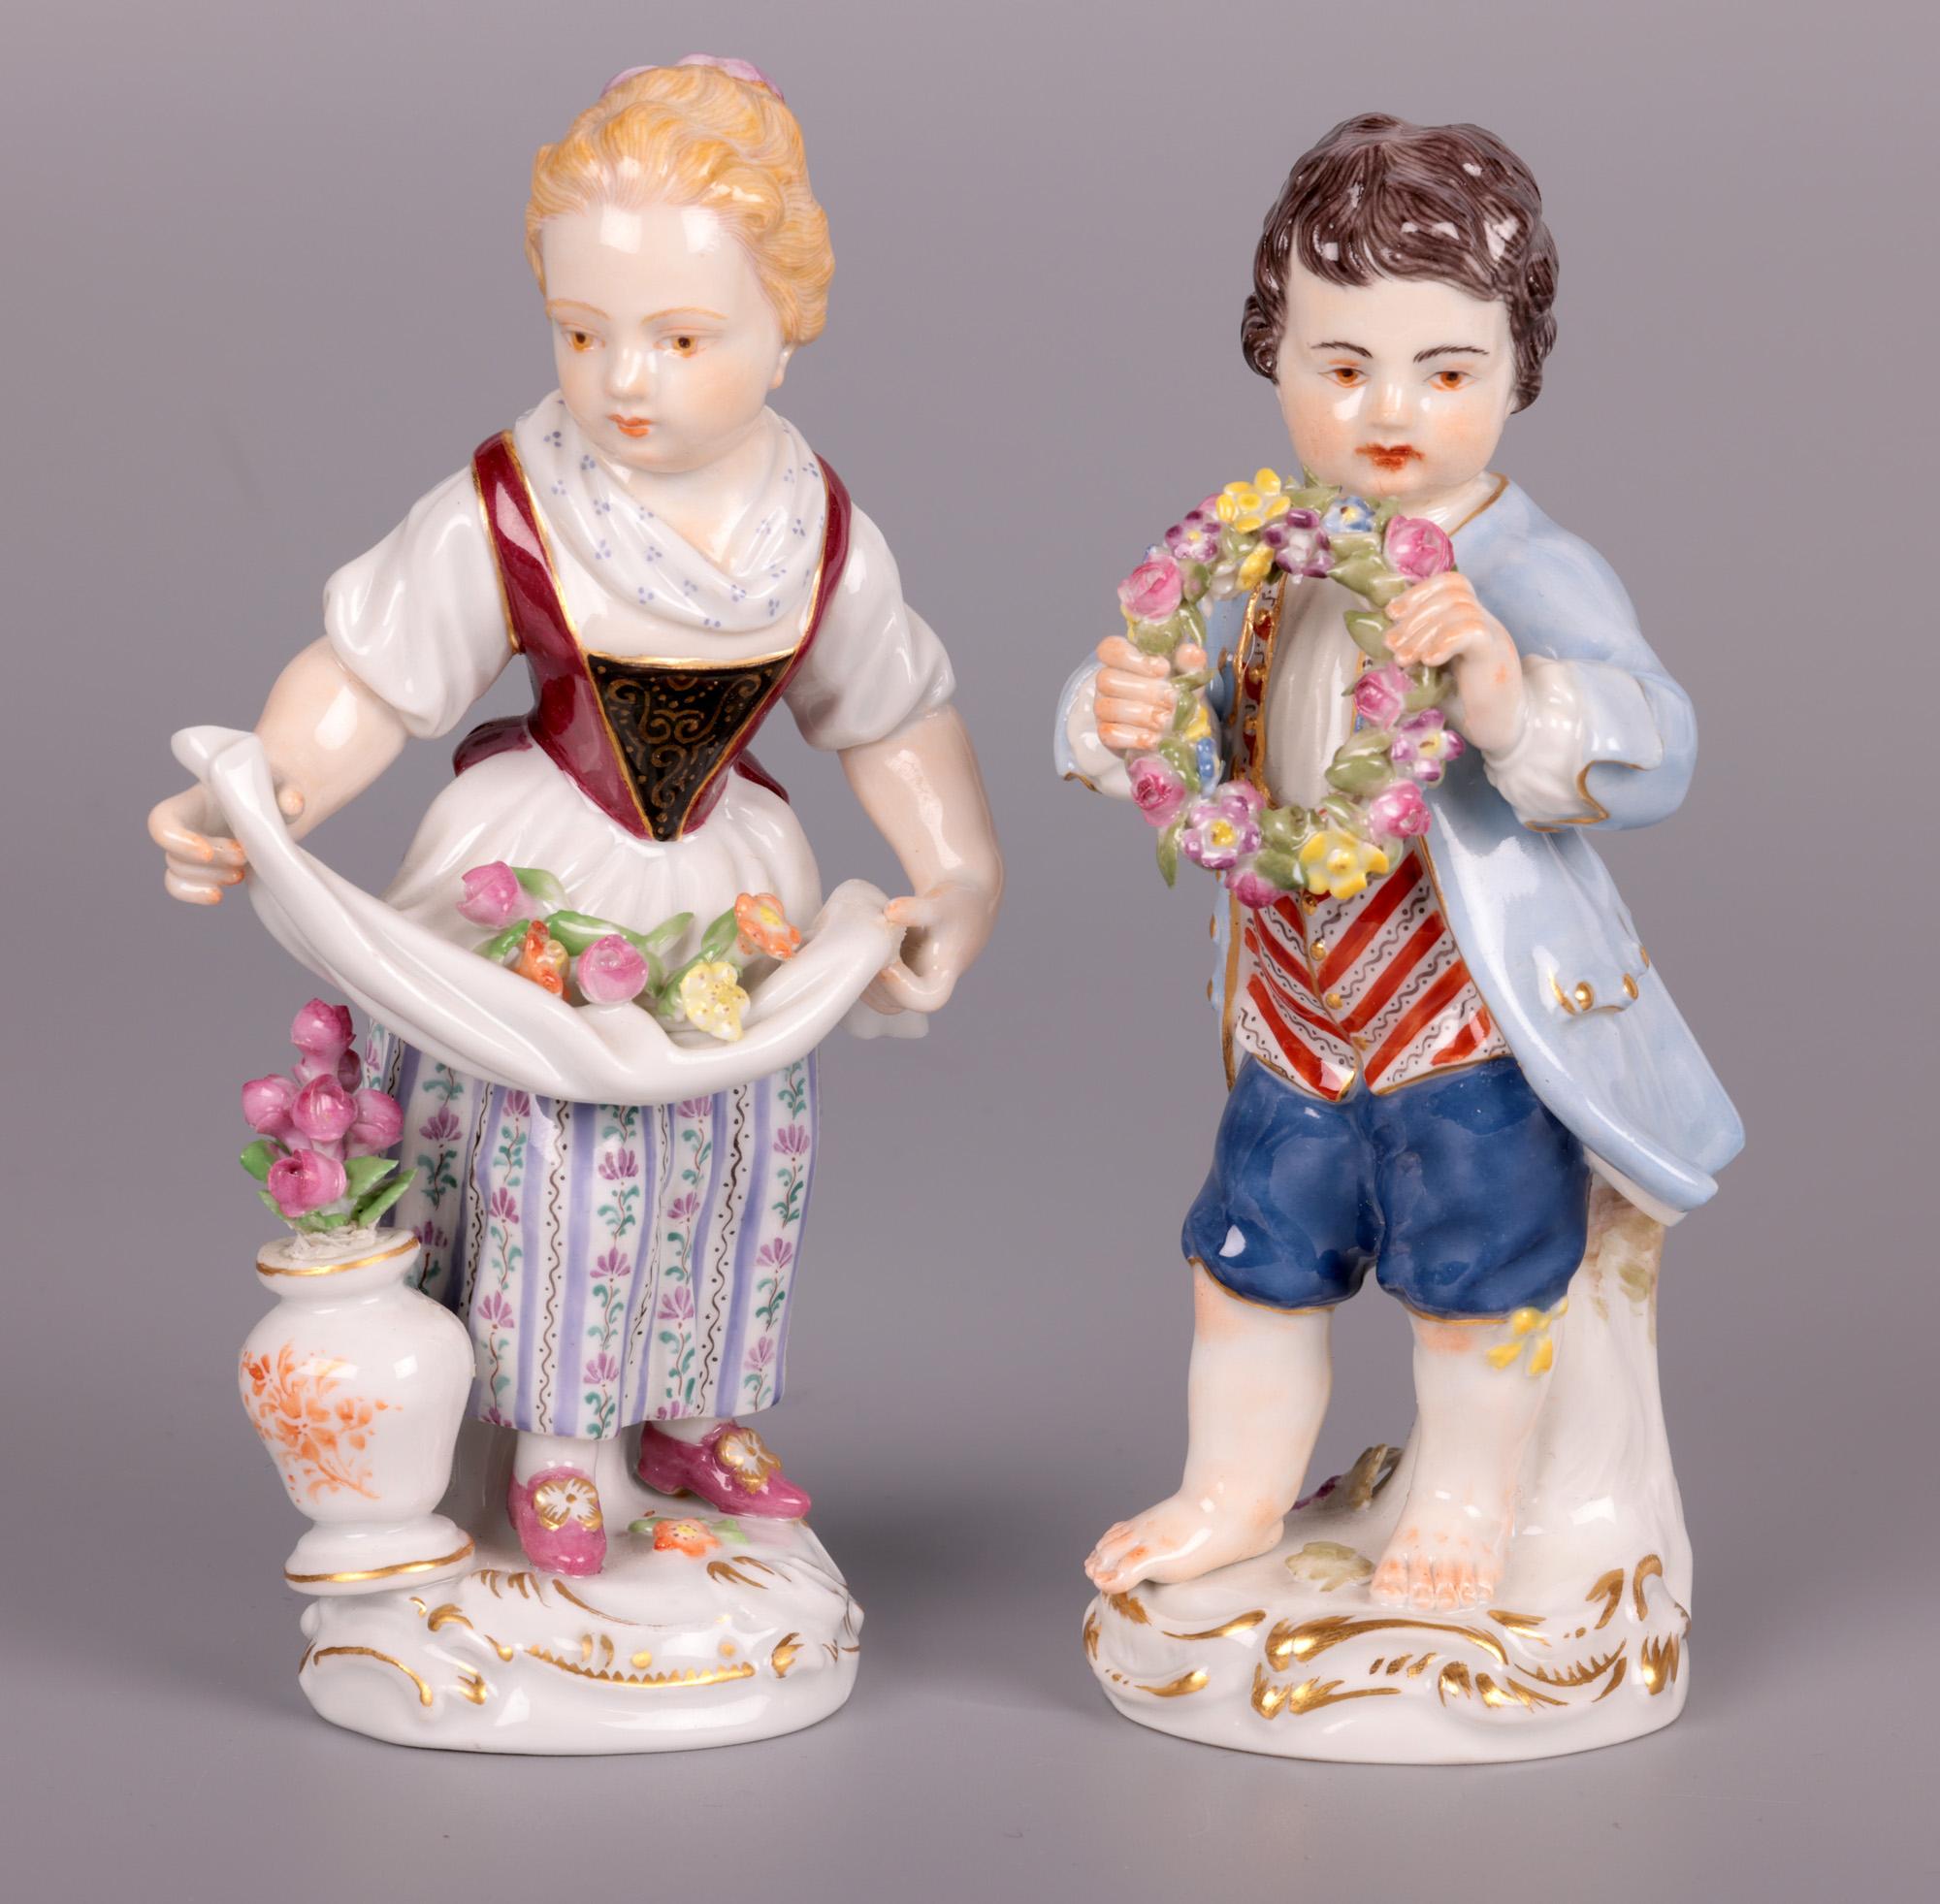 Hand-Crafted Meissen Boy & Girl Porcelain Figures with Flowers For Sale